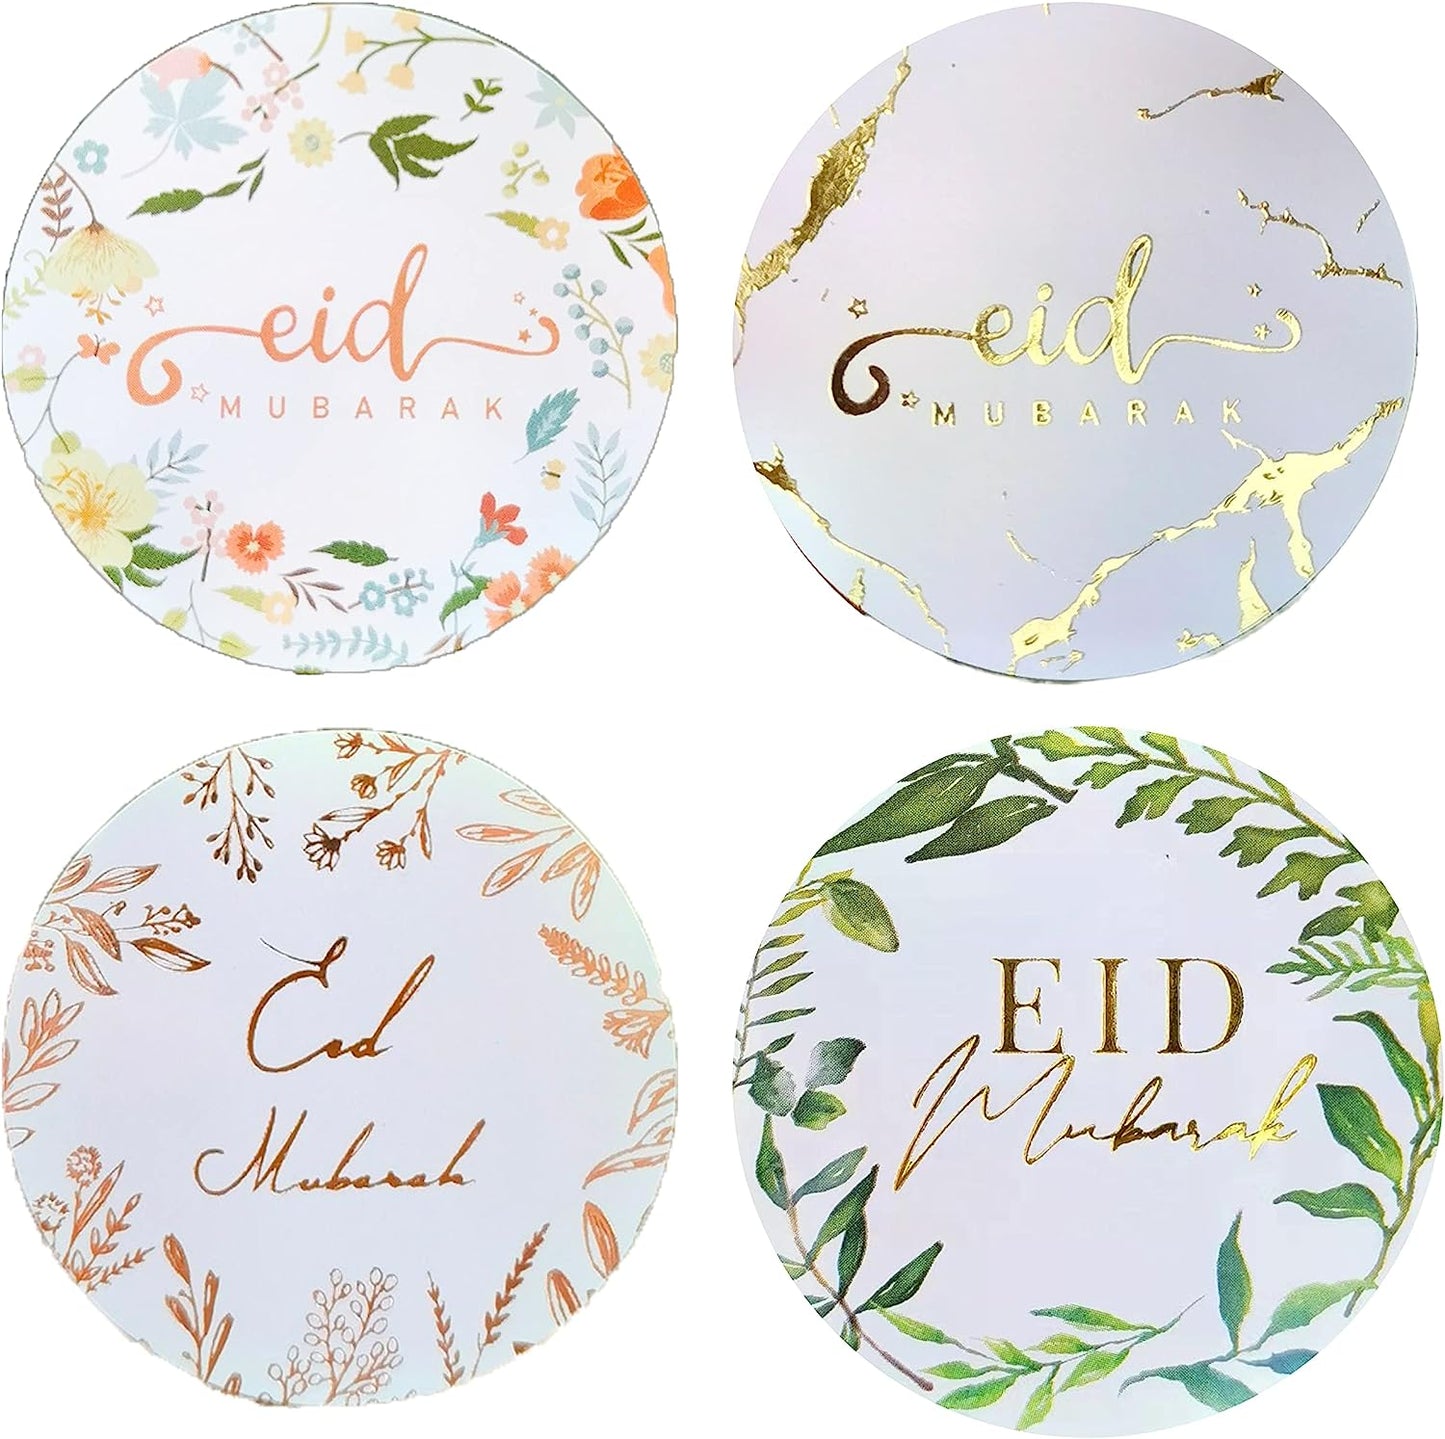 40 Pcs Eid Mubarak Stickers (4cm) Self Adhesive Use for Goodie Bags, Party Favors, Money Envelopes, Greeting Cards, Gift Bags,Gift Boxes, and Cookie Box (Foil Stamping)